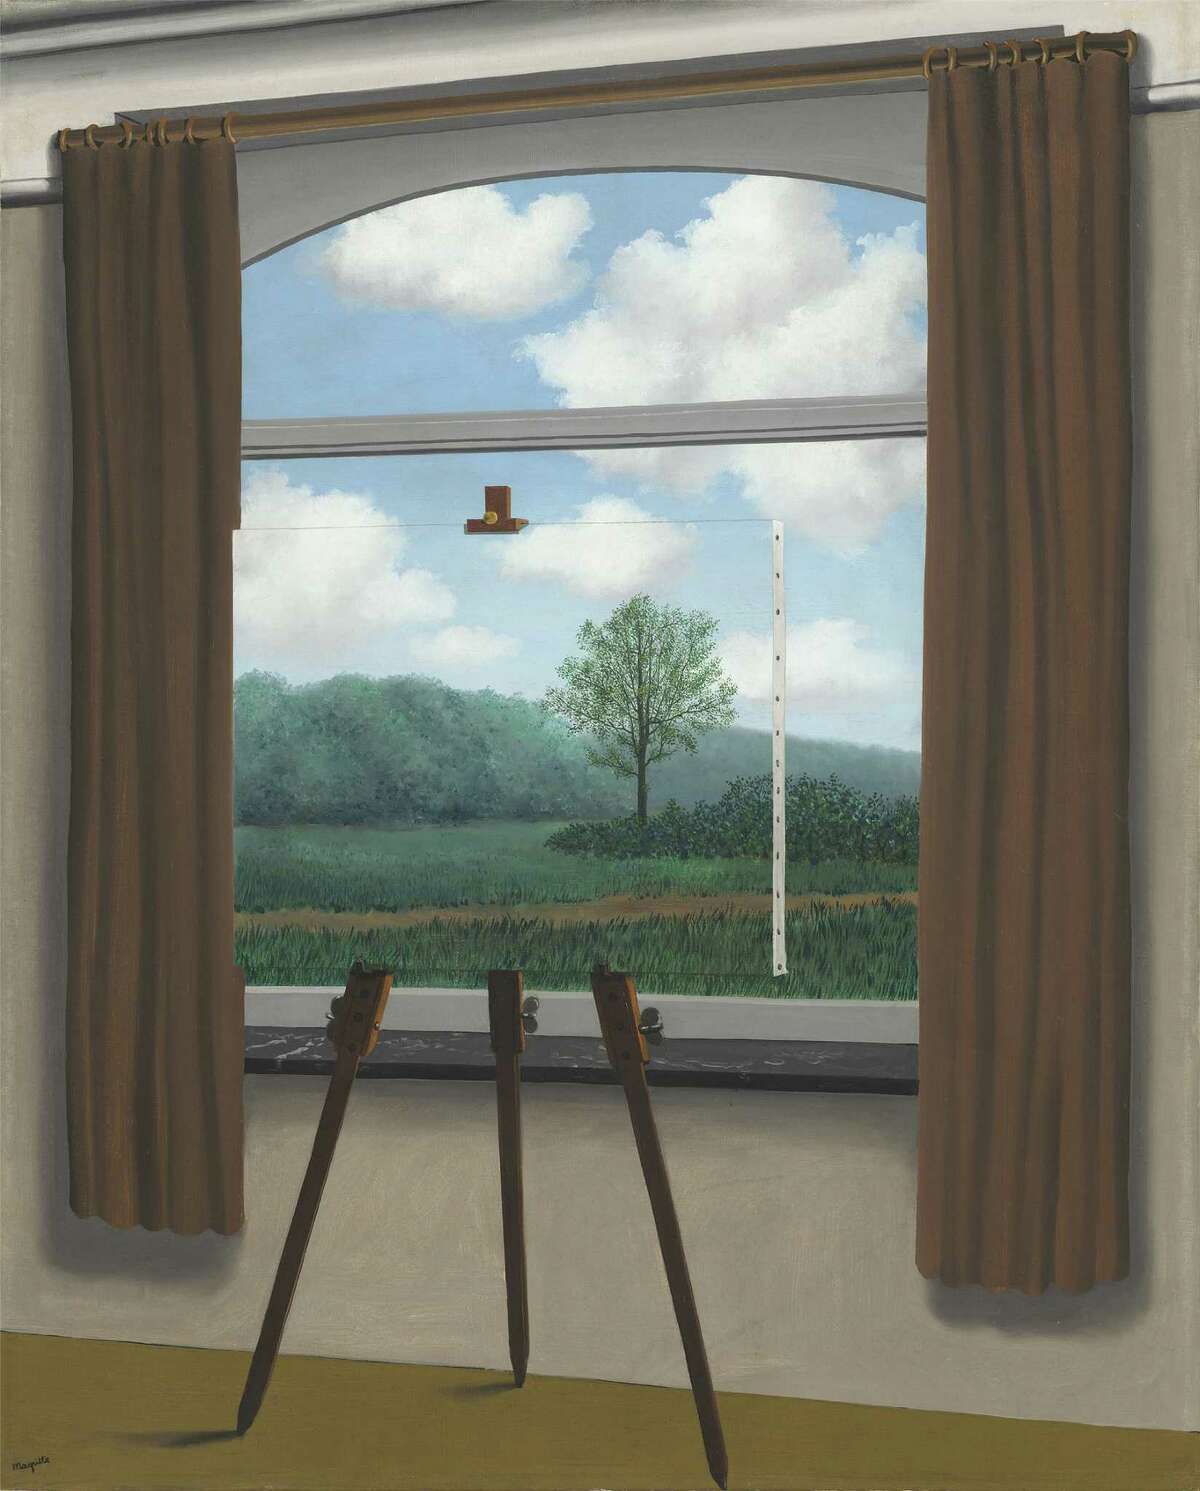 "The Human Condition": A little Magritte never hurt anyone.